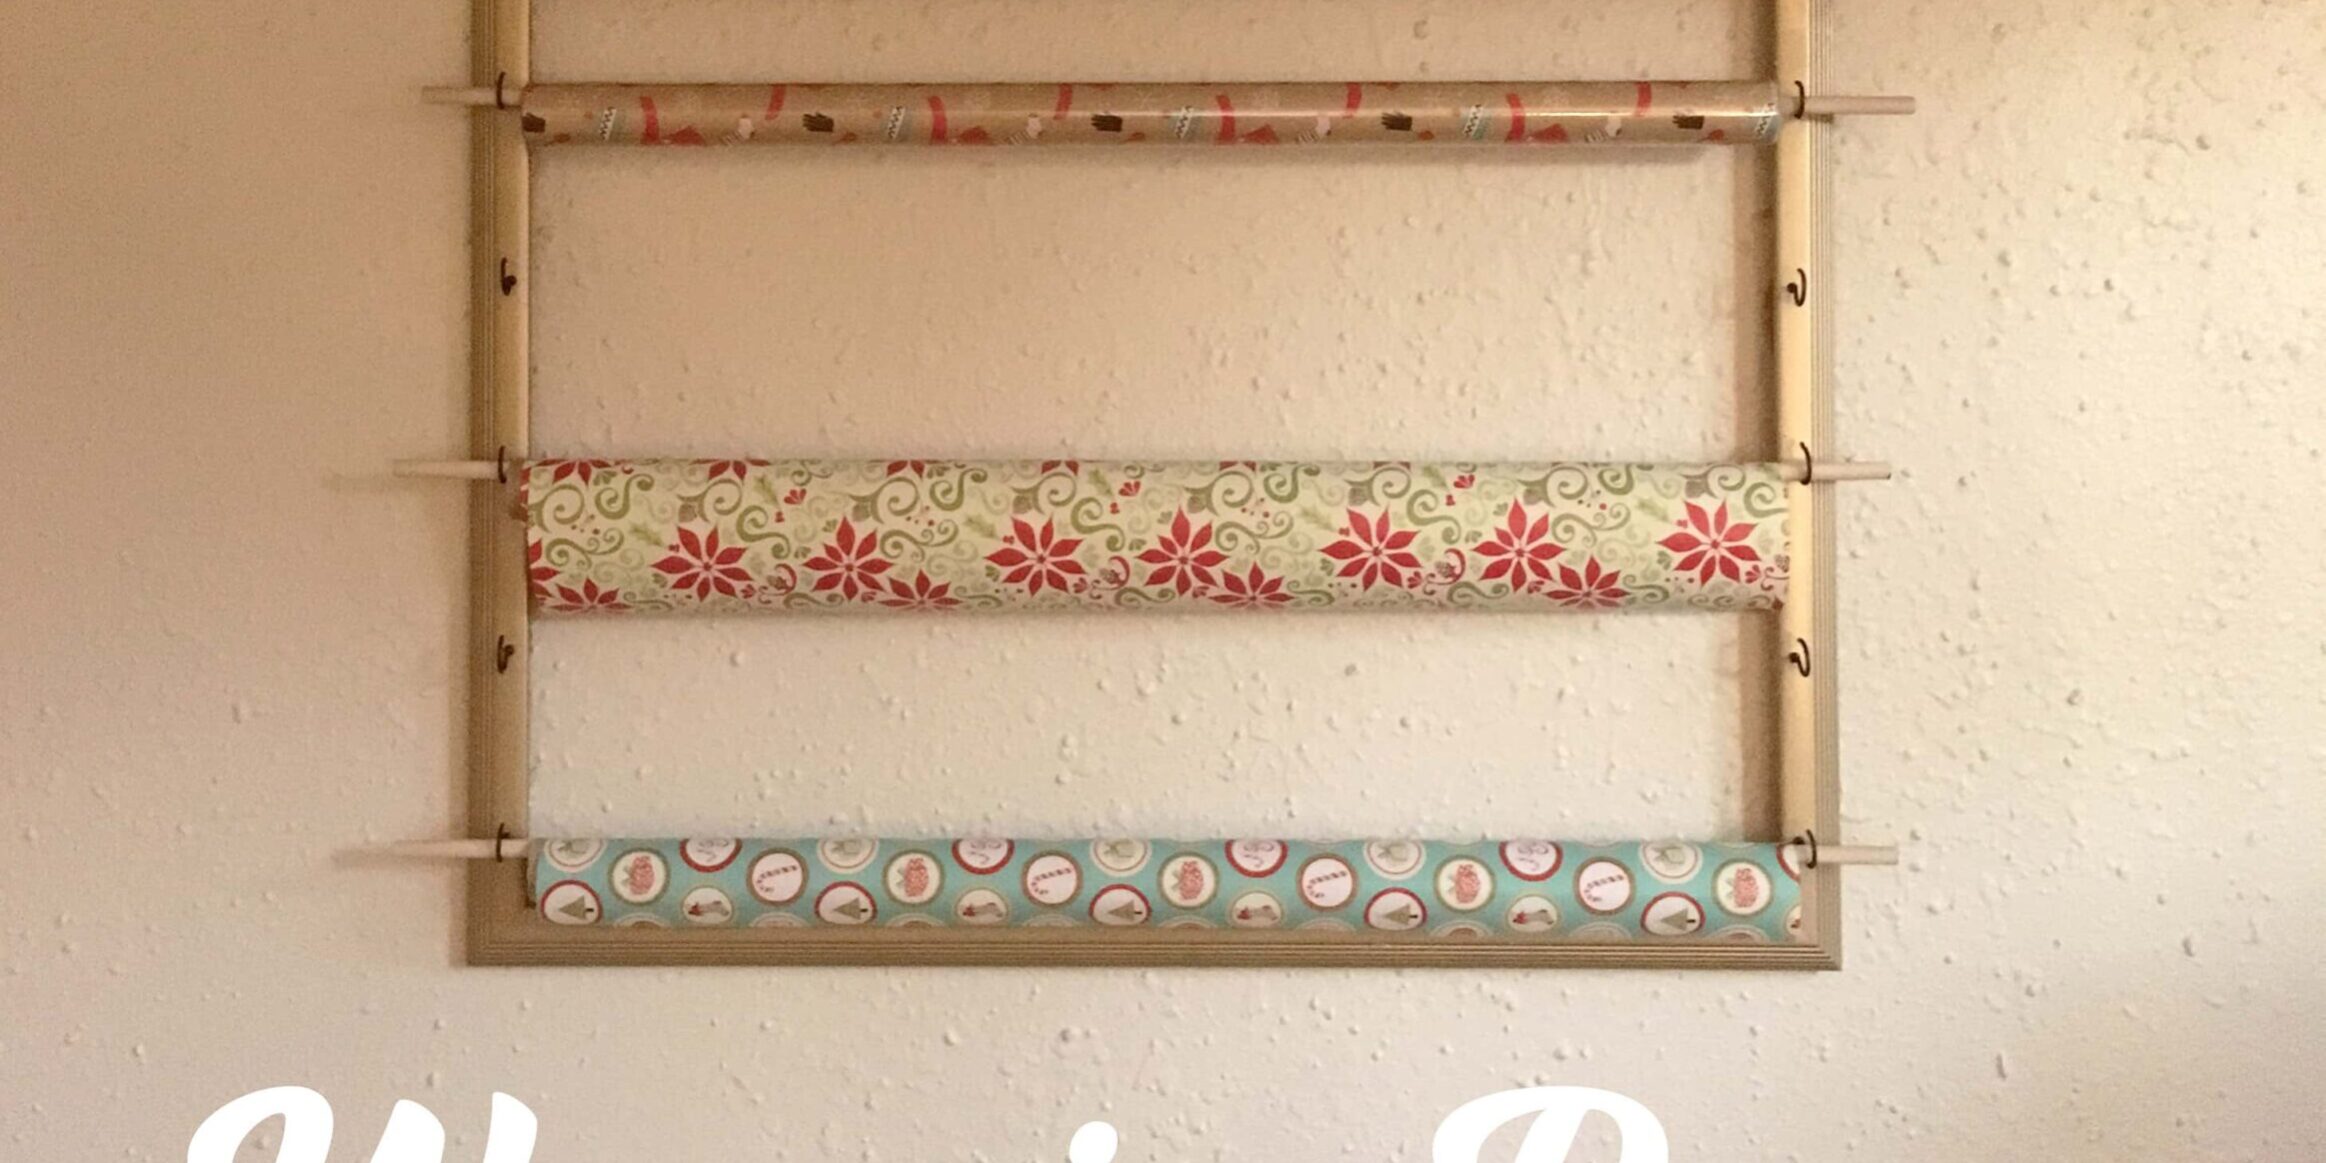 Wrapping Paper Organizer - Goodwill